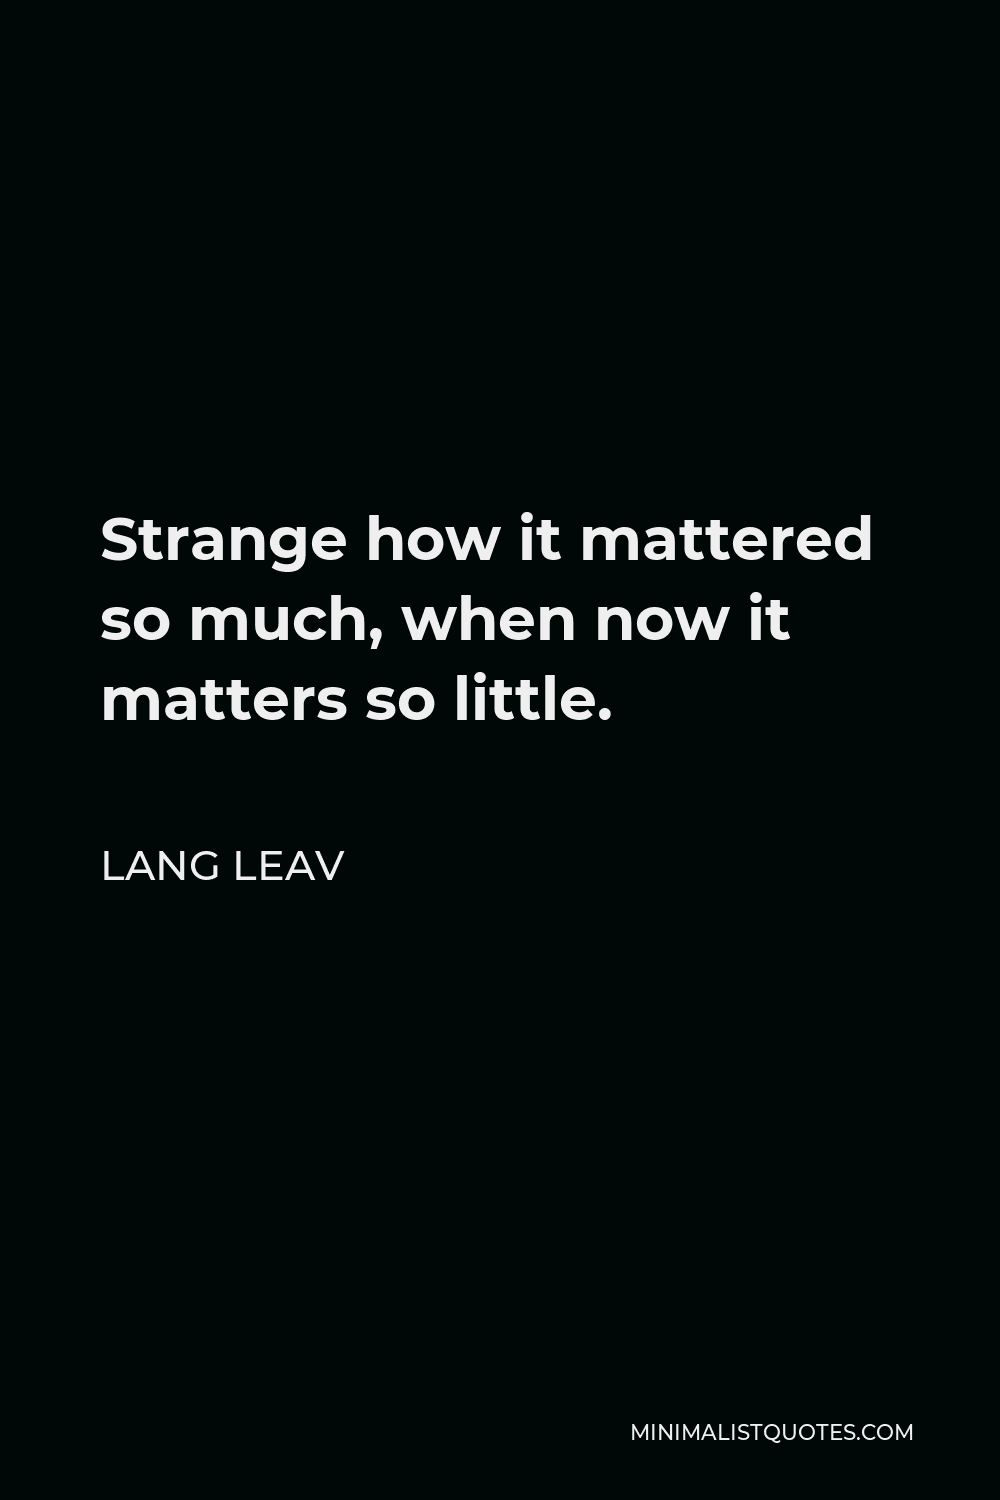 Lang Leav Quote - Strange how it mattered so much, when now it matters so little.